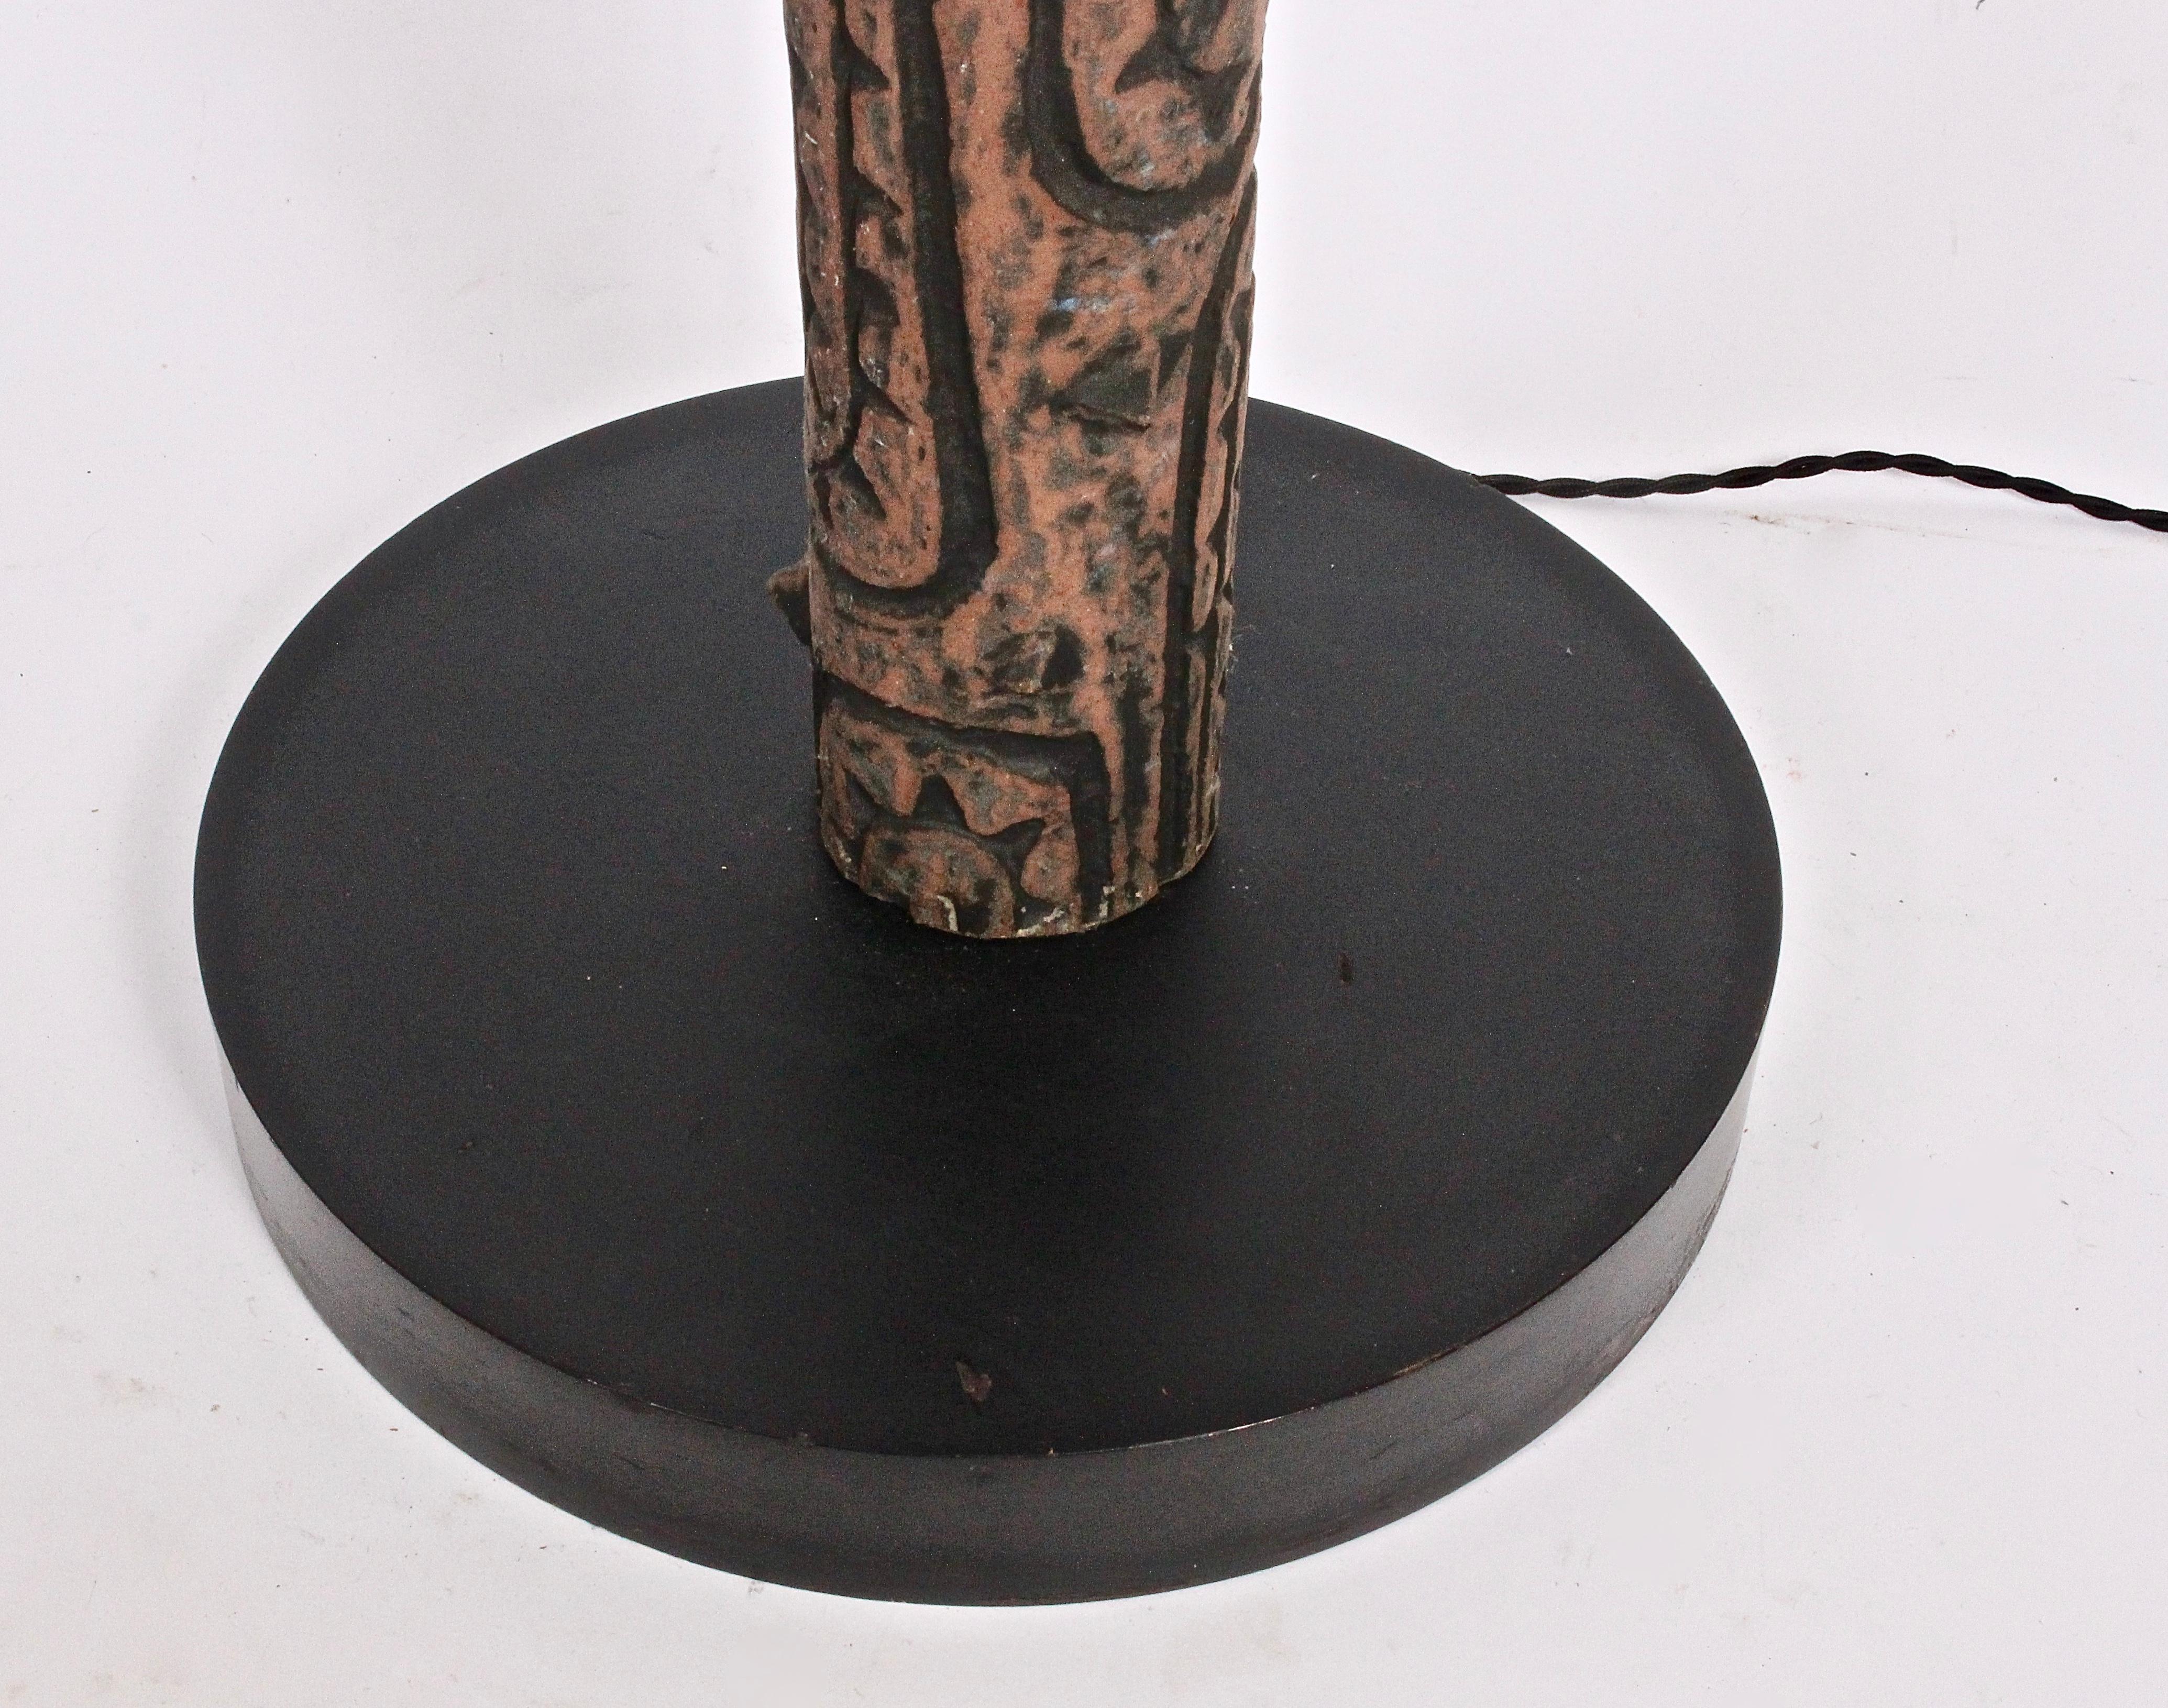 Lee Rosen for Design-Technics Incised Arboreal Pottery Floor Lamp, 1965 In Good Condition For Sale In Bainbridge, NY